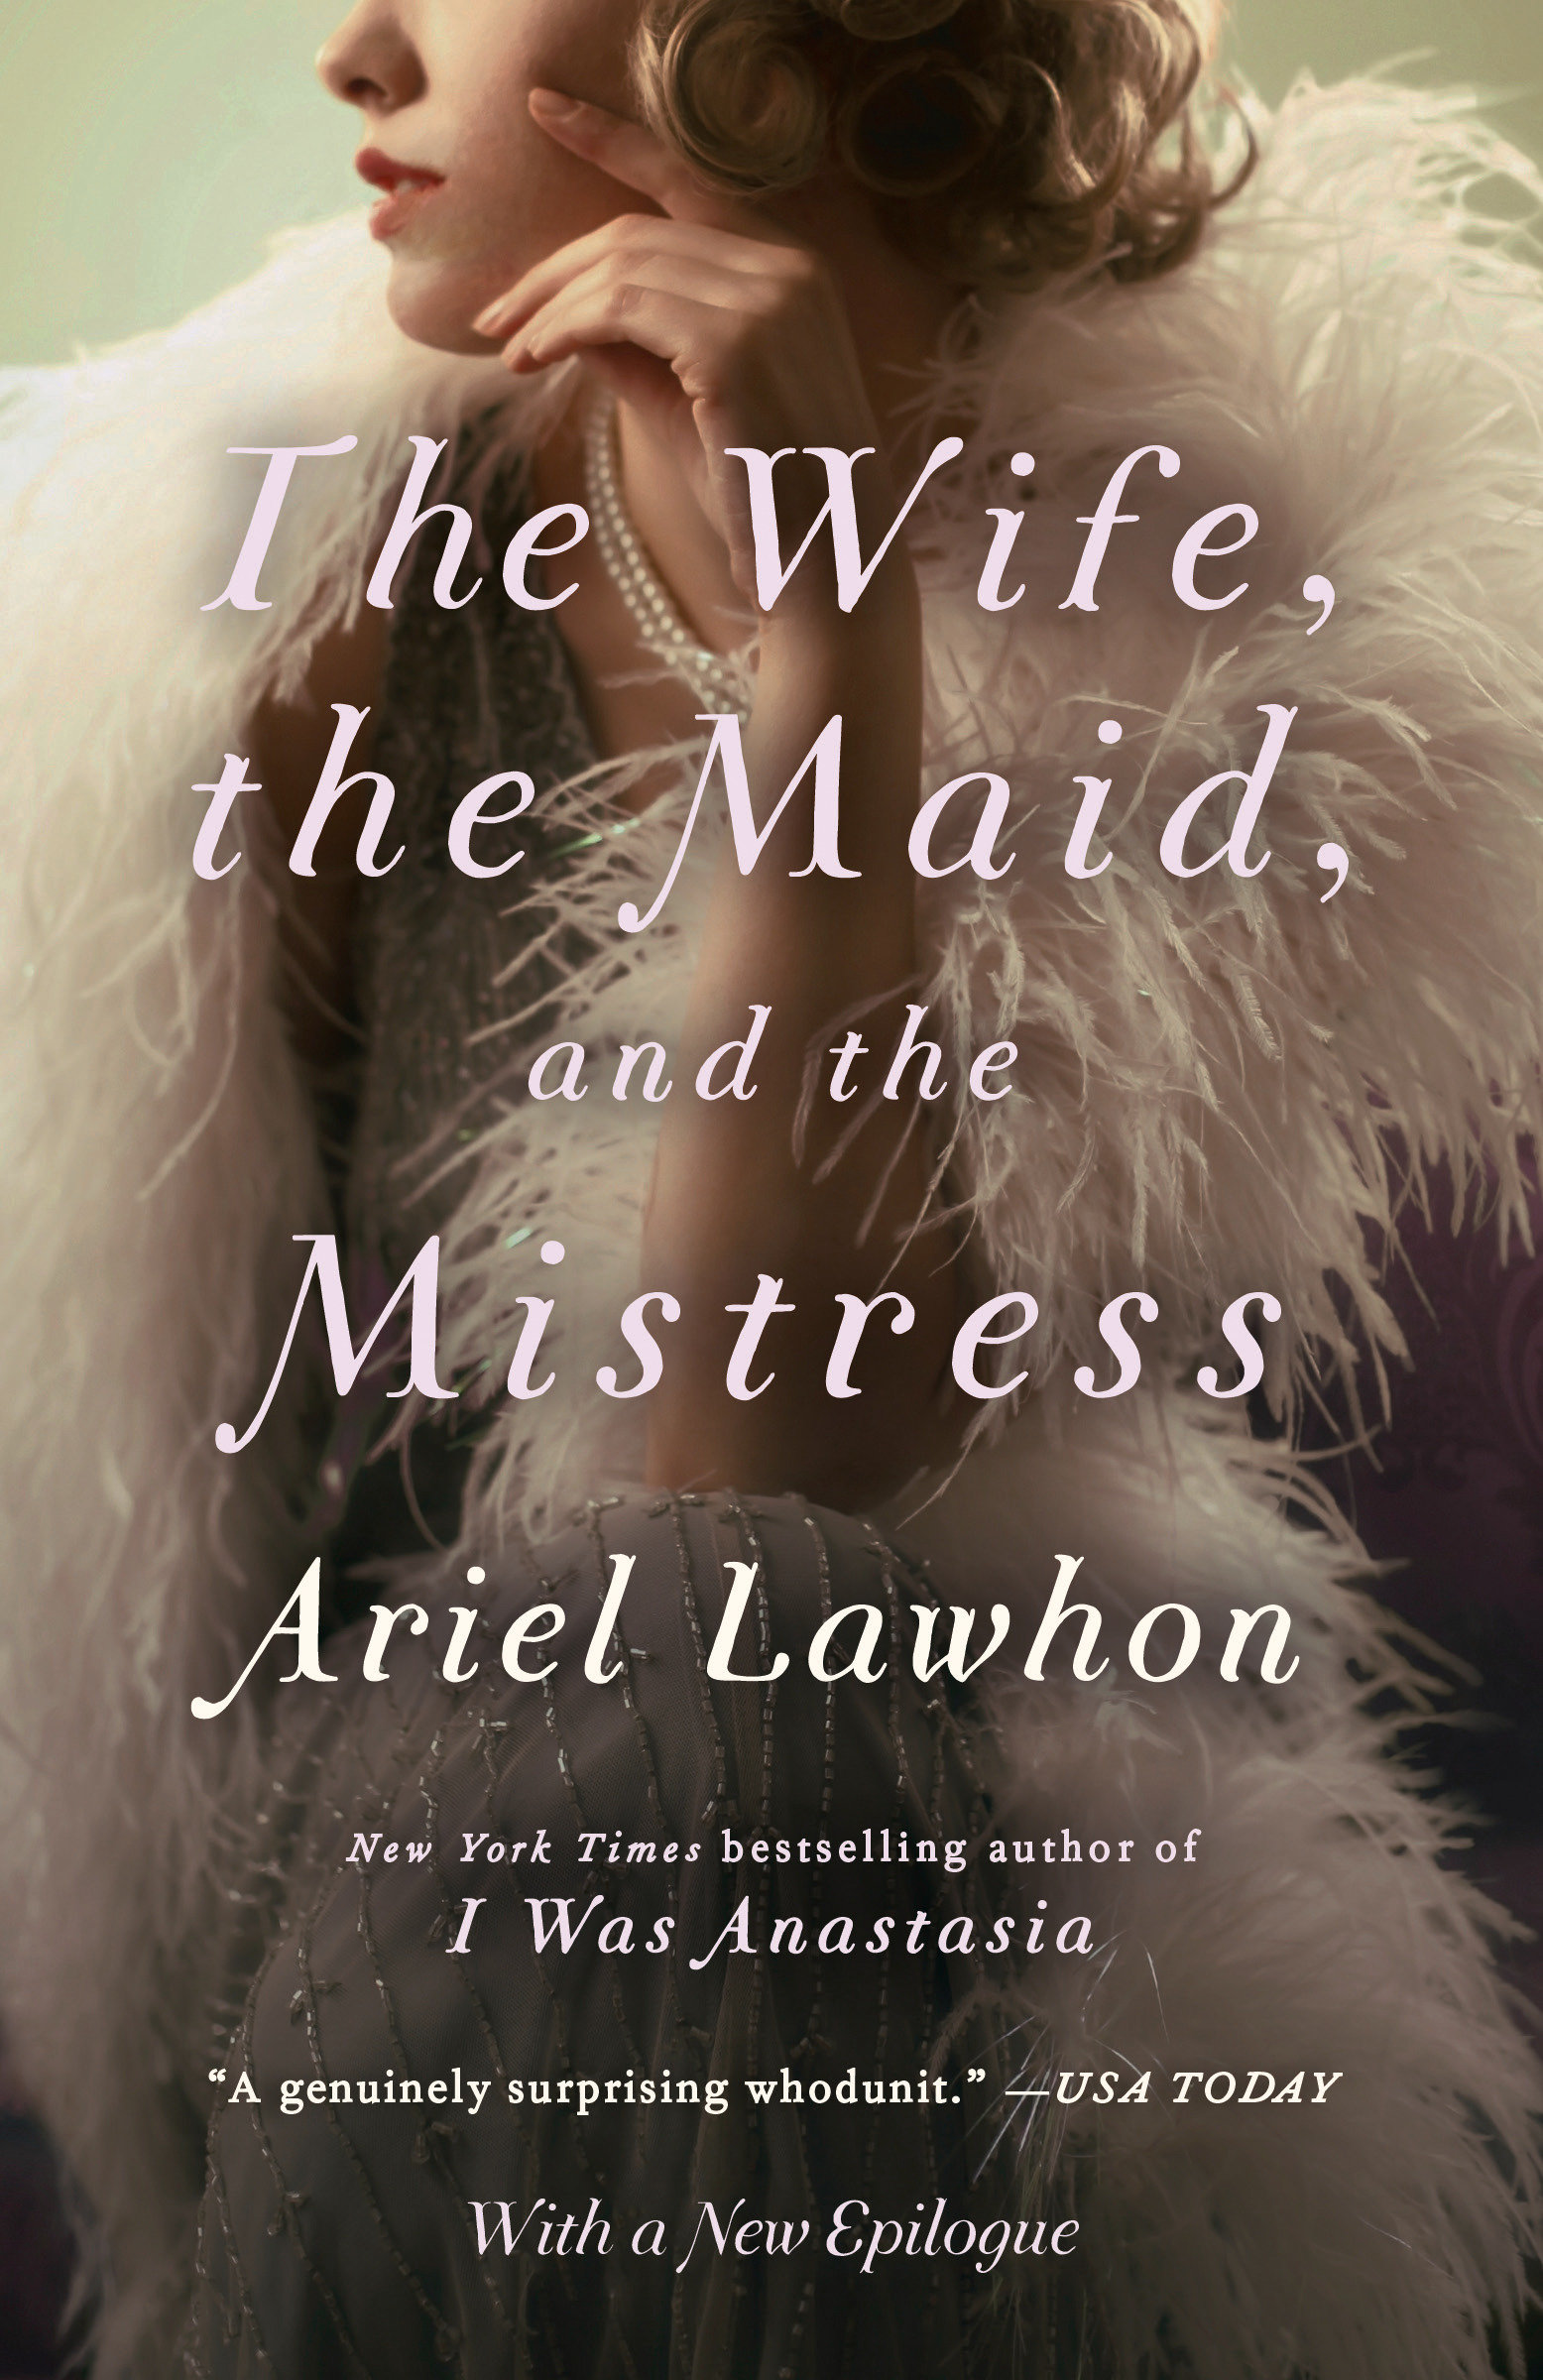 Image de couverture de The Wife, the Maid, and the Mistress [electronic resource] : A Novel